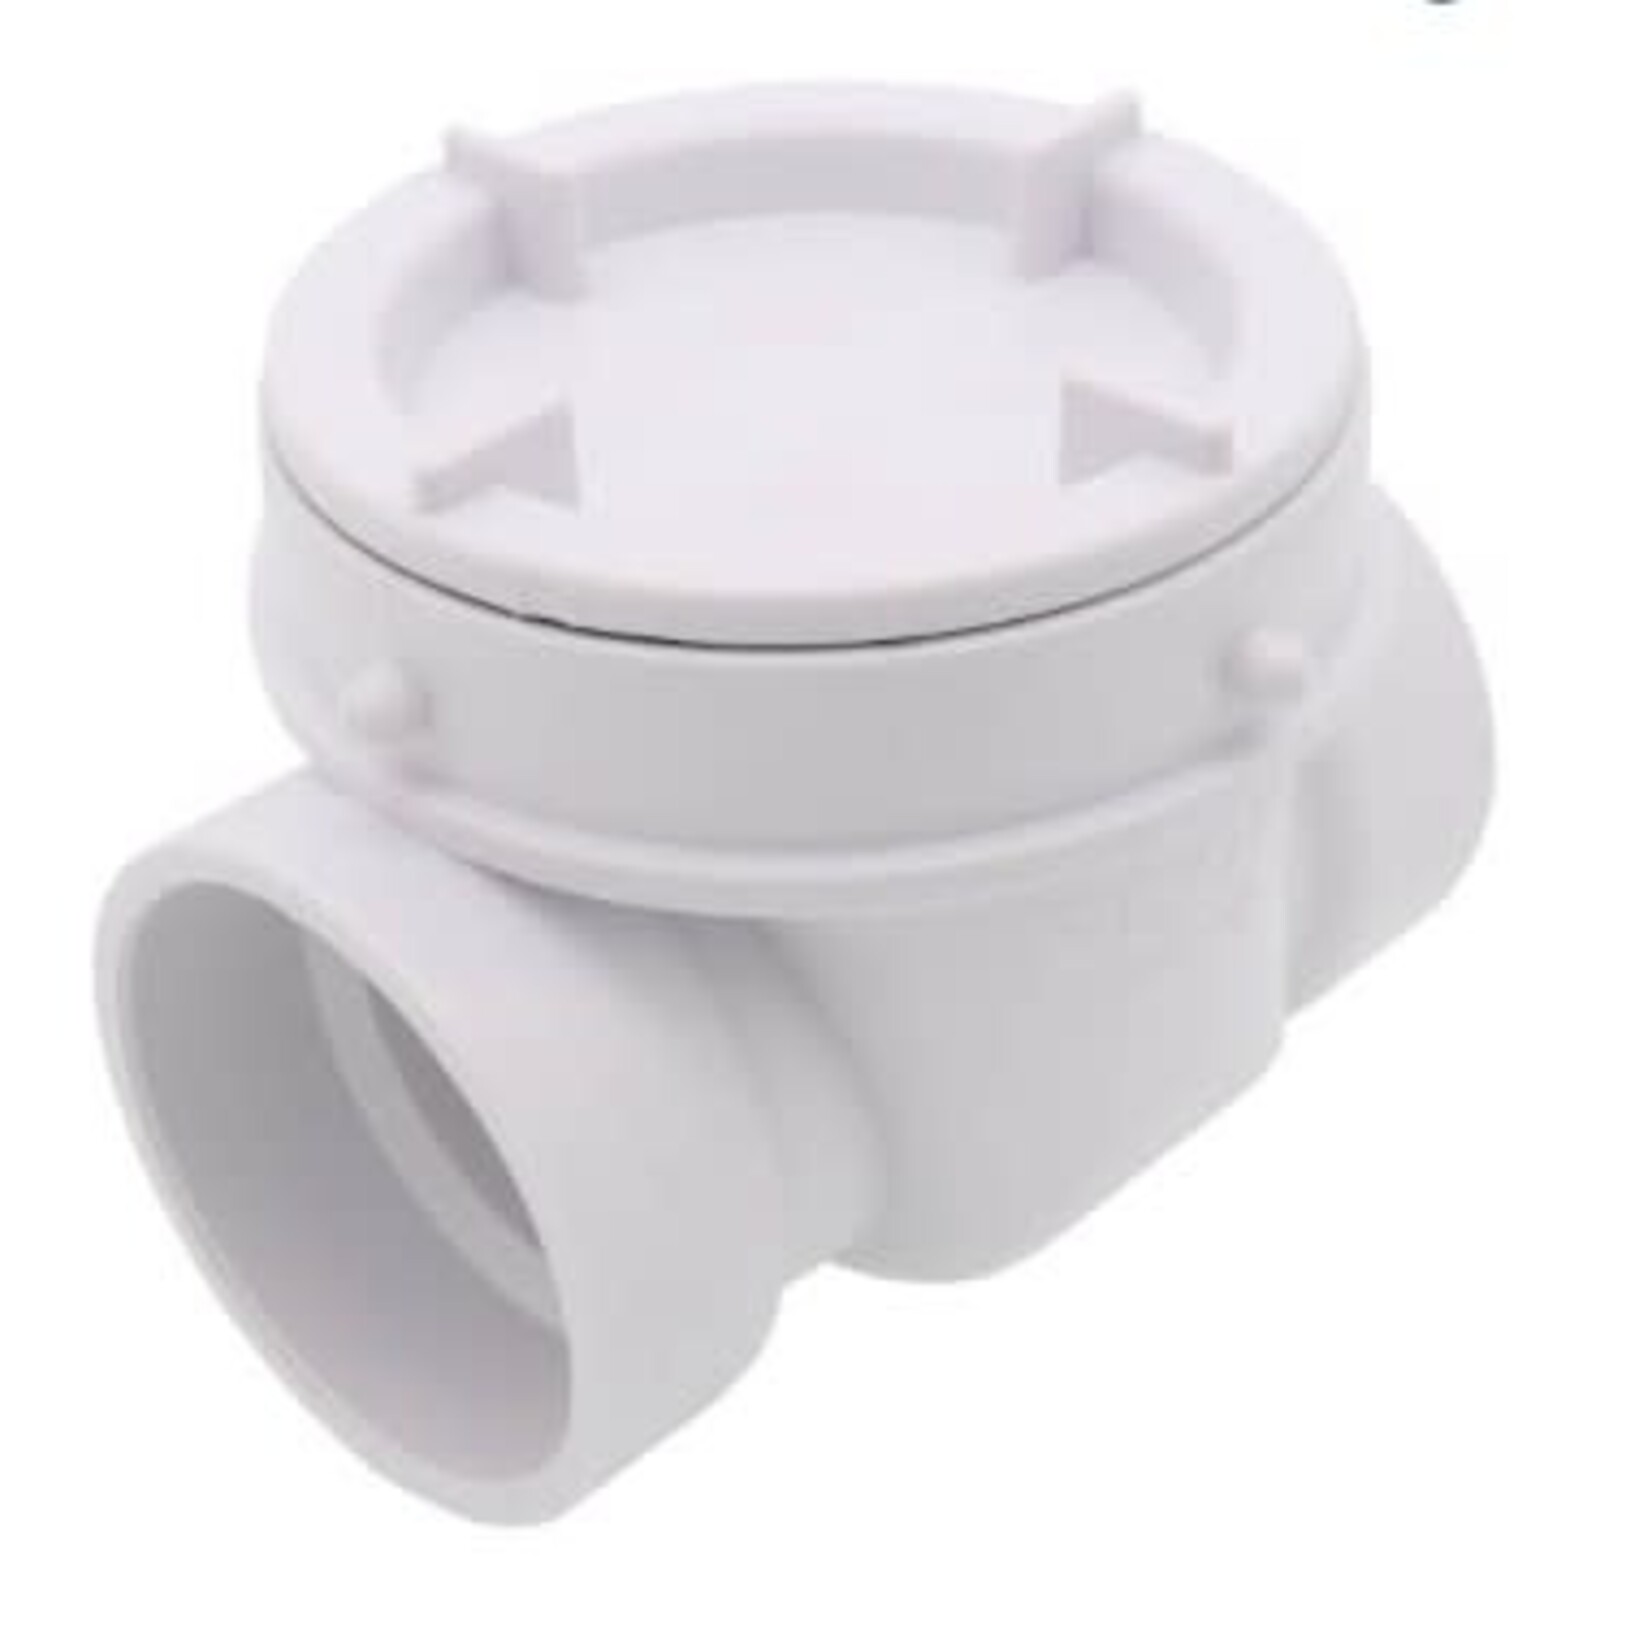 SIOUX CHIEF 2 IN PVC BACKWATER VALVE